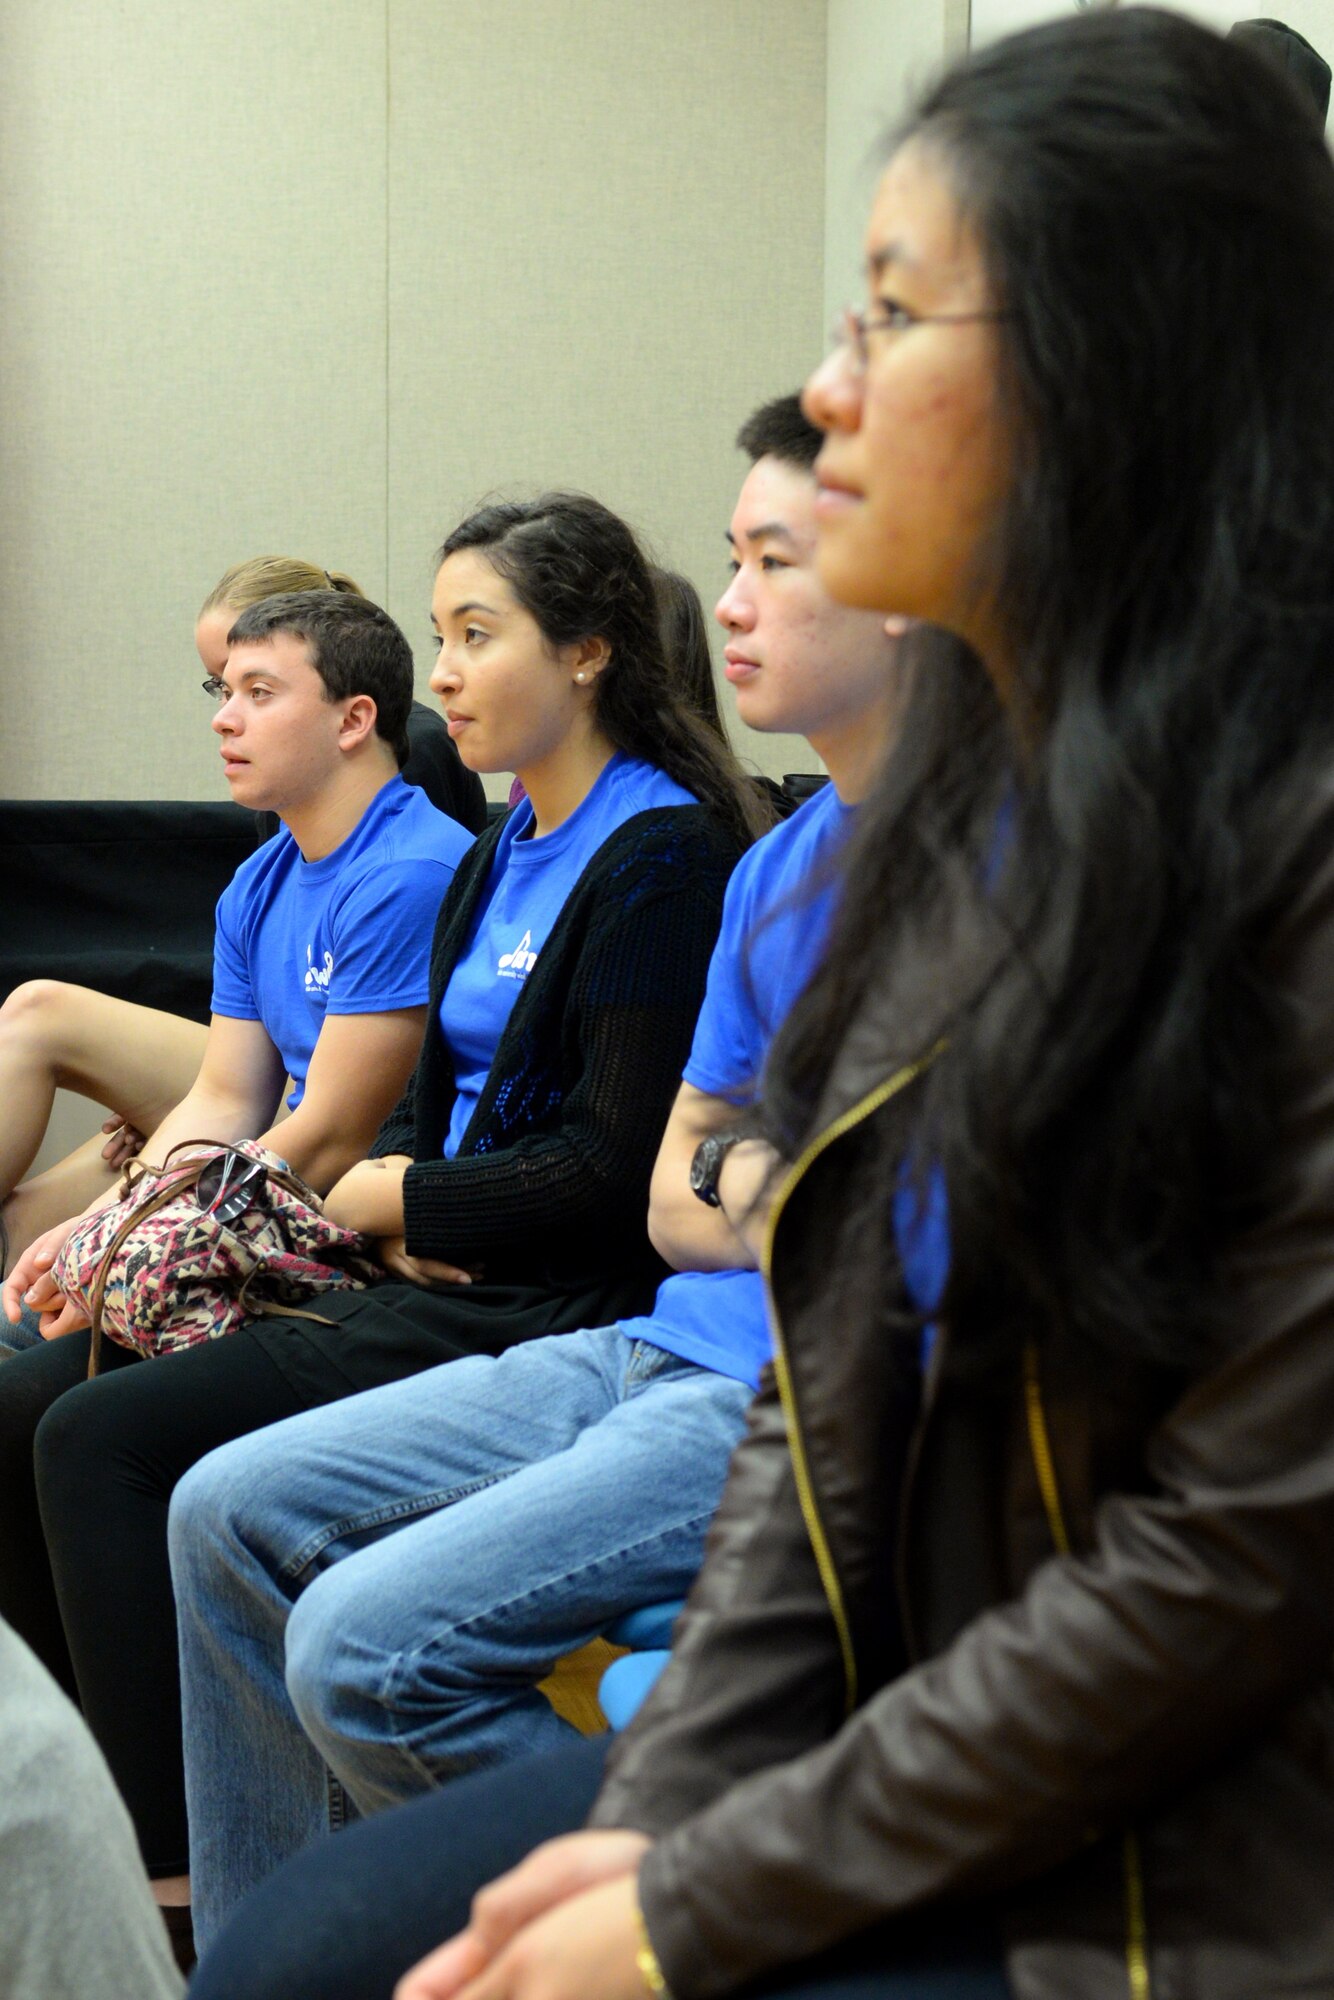 Students from Duke University watch the U.S. Air Force Concert Band rehearse at Joint Base Anacostia-Bolling, Washington D.C., Oct. 13, 2015. The members of Duke University’s Wind Symphony visited the U.S. Air Force Band today for an immersion in music and Air Force culture. The students attended Masterclass sessions led by performers from the Band to further develop mastery of their instruments before watching the Concert Band’s final rehearsal before their fall tour. (U.S. Air Force photo/1st Lt. Esther Willett)